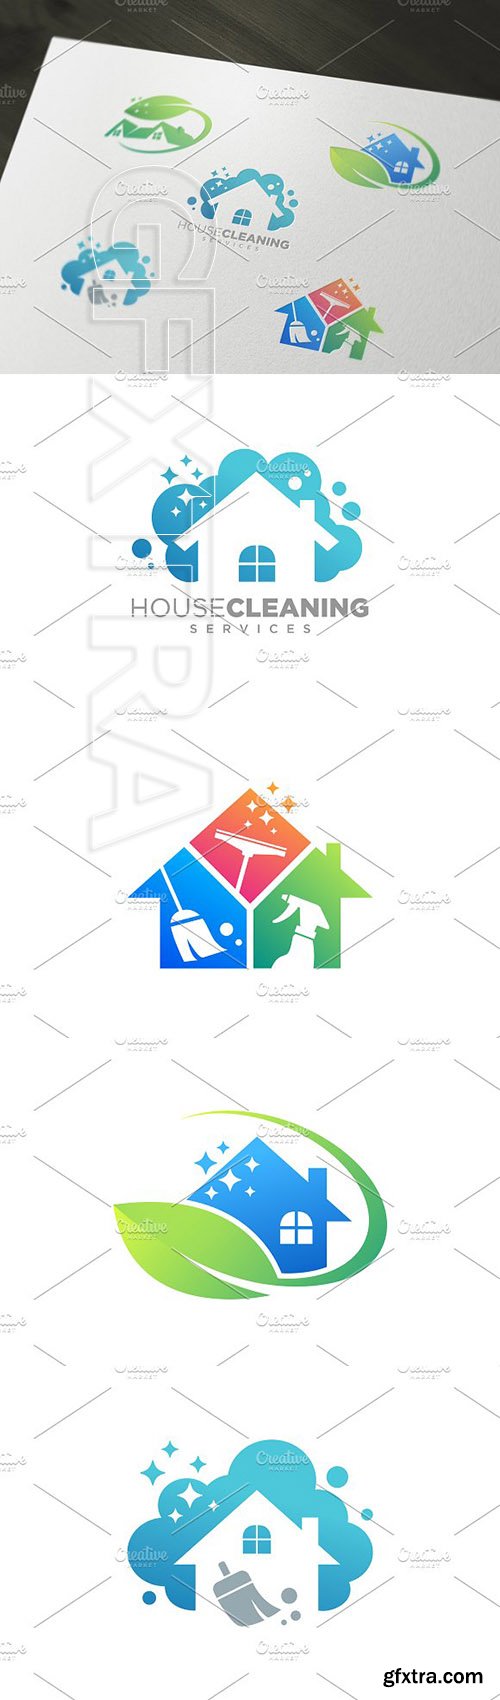 CreativeMarket - House Cleaning Design Collections 2534064